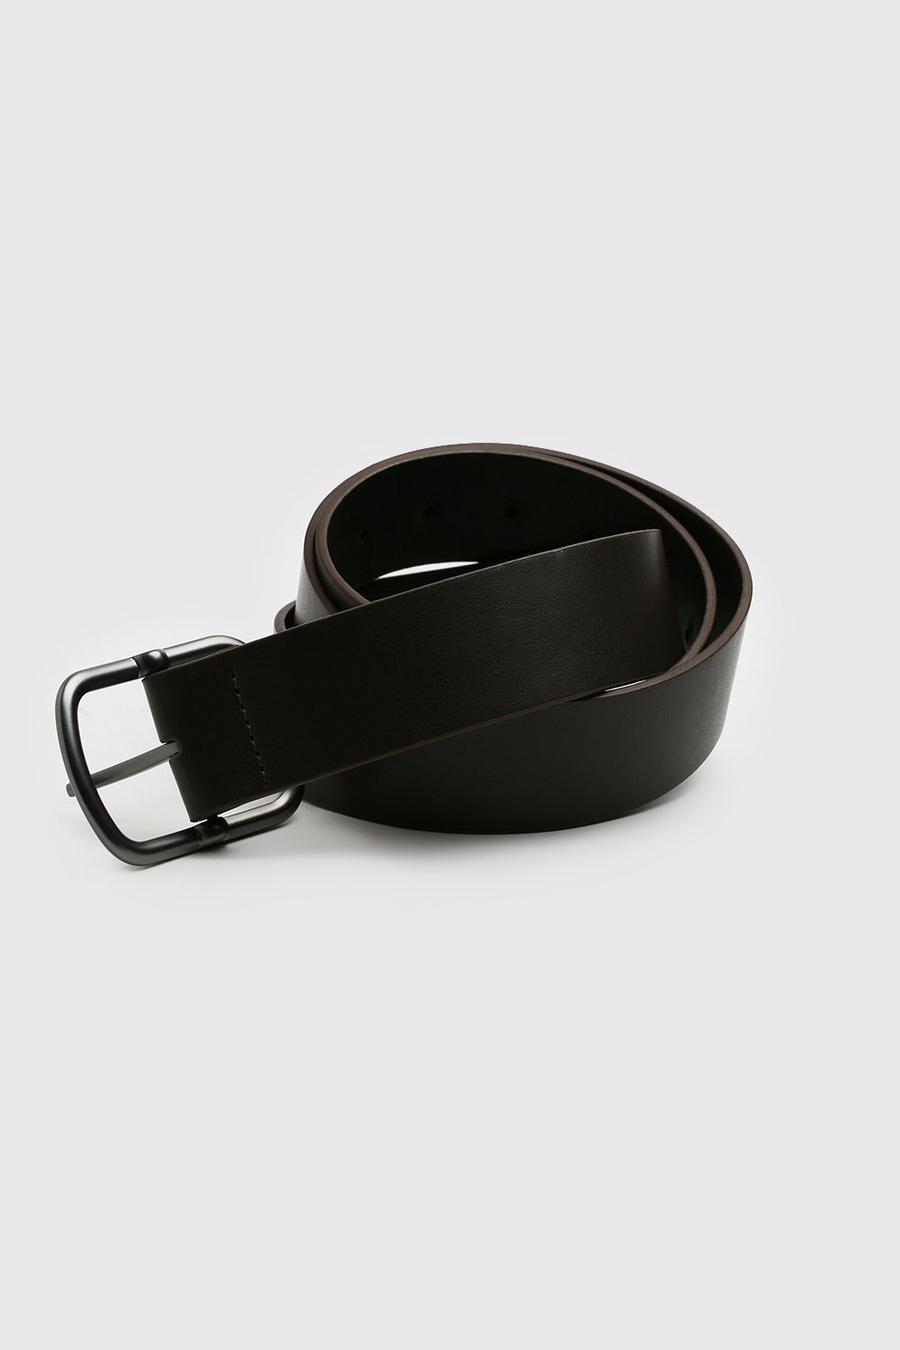 Brown Faux Leather Belt image number 1